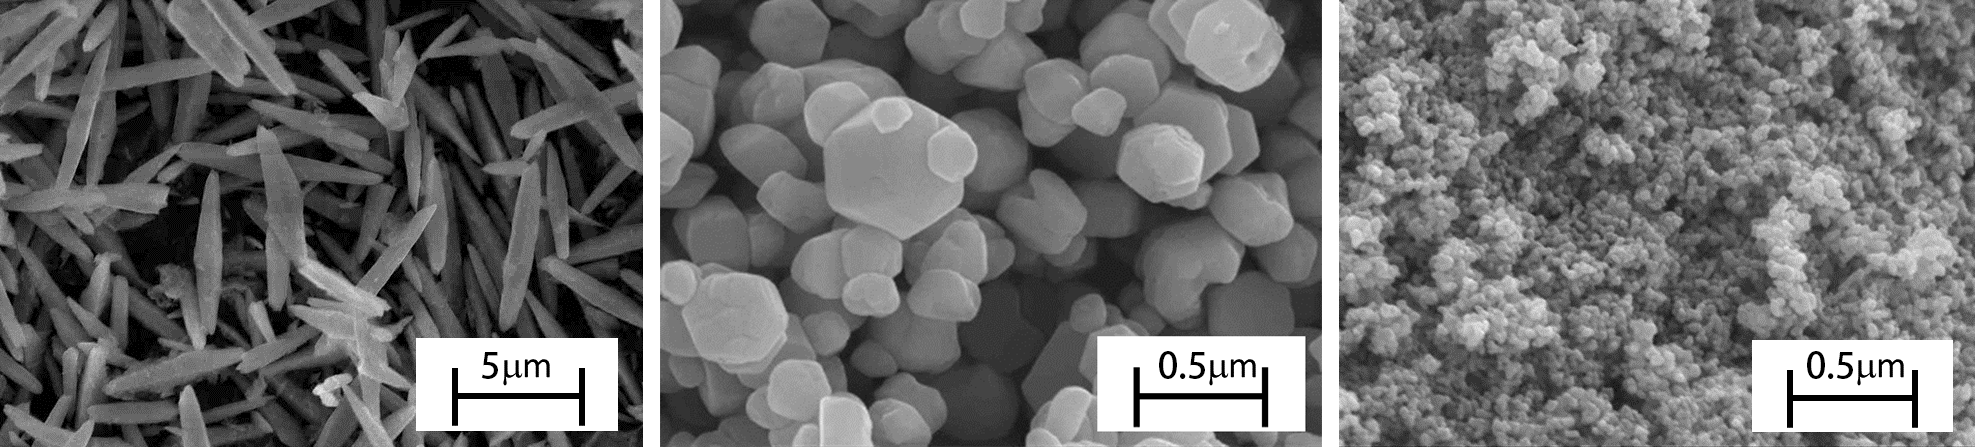 Scanning electron micrographs of zinc oxide nanoparticles